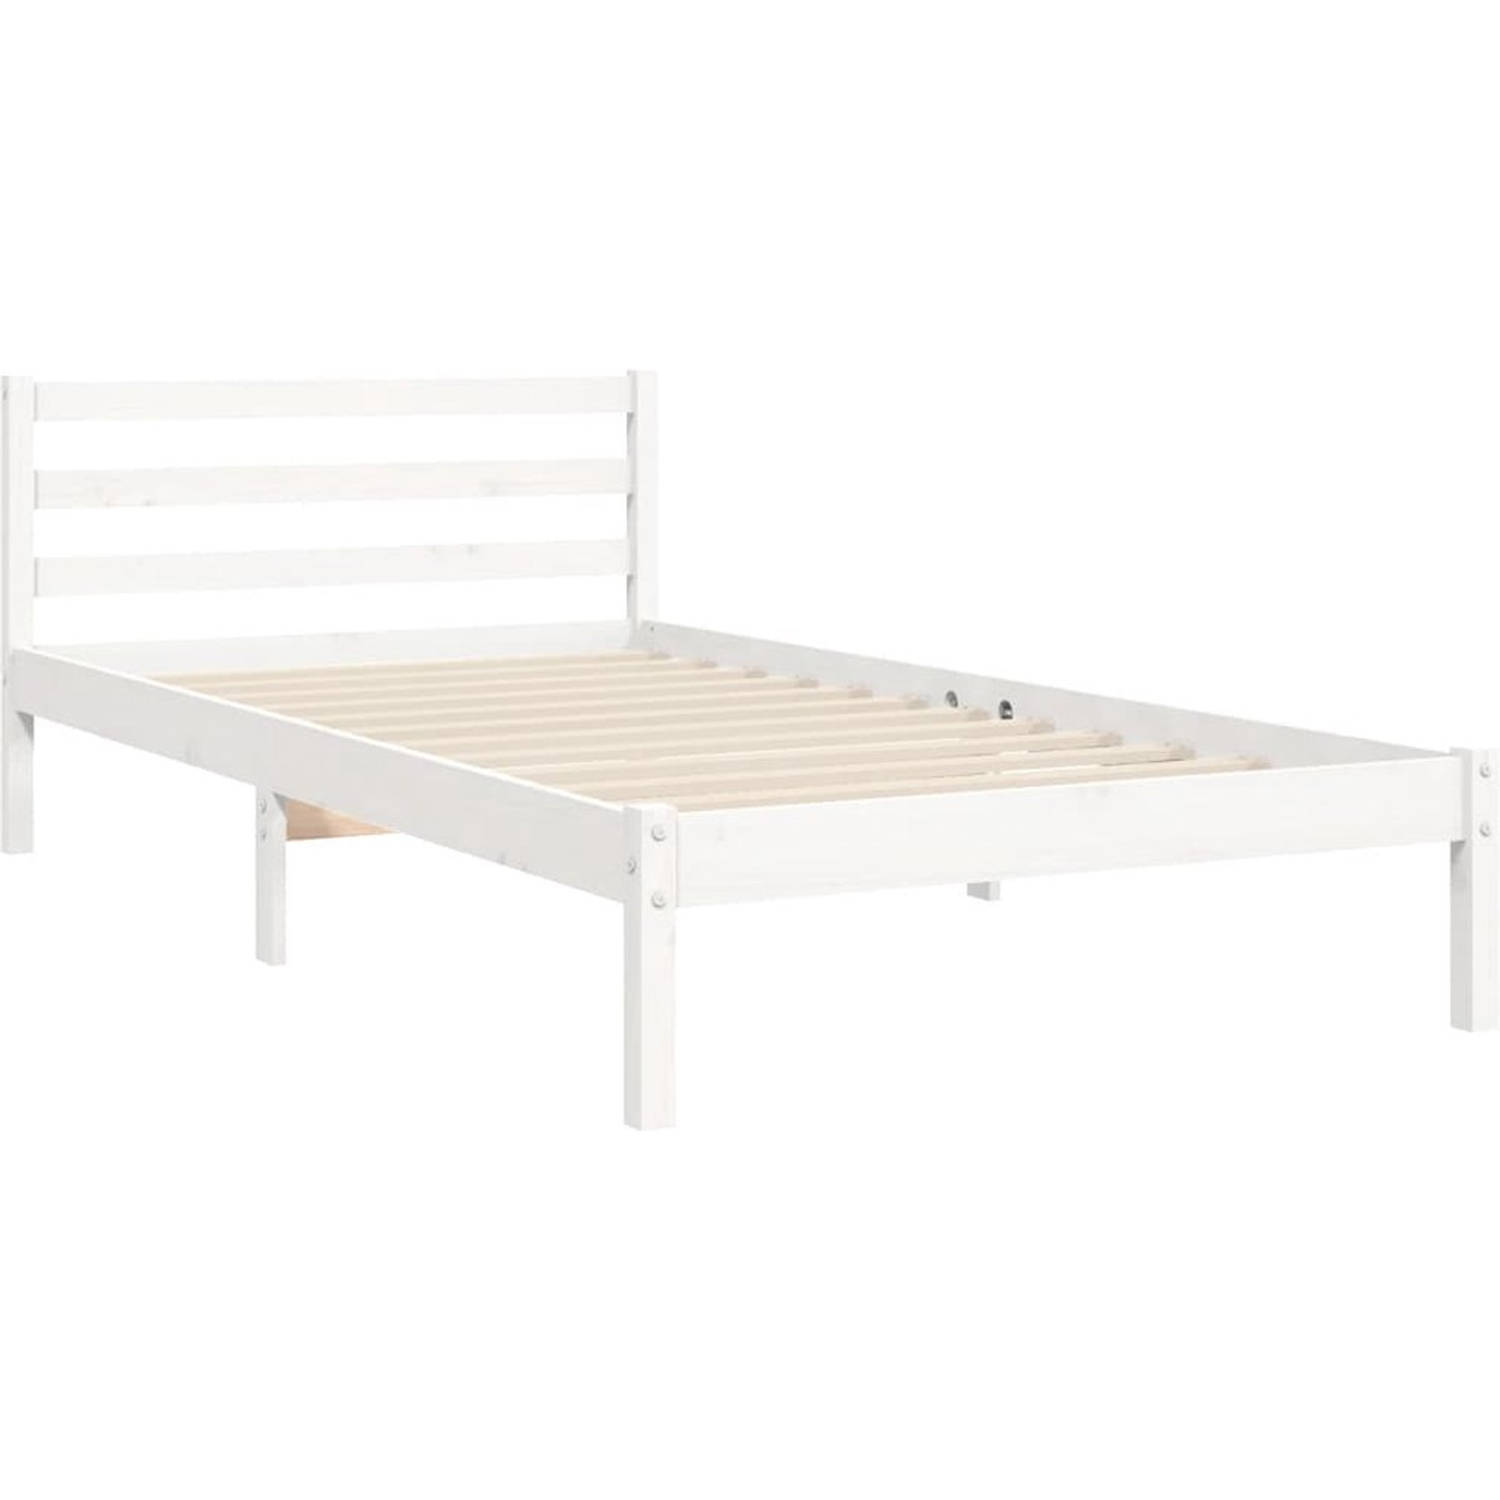 The Living Store Bedframe - Massief grenenhout - 195.5 x 95.5 x 100 cm - Wit